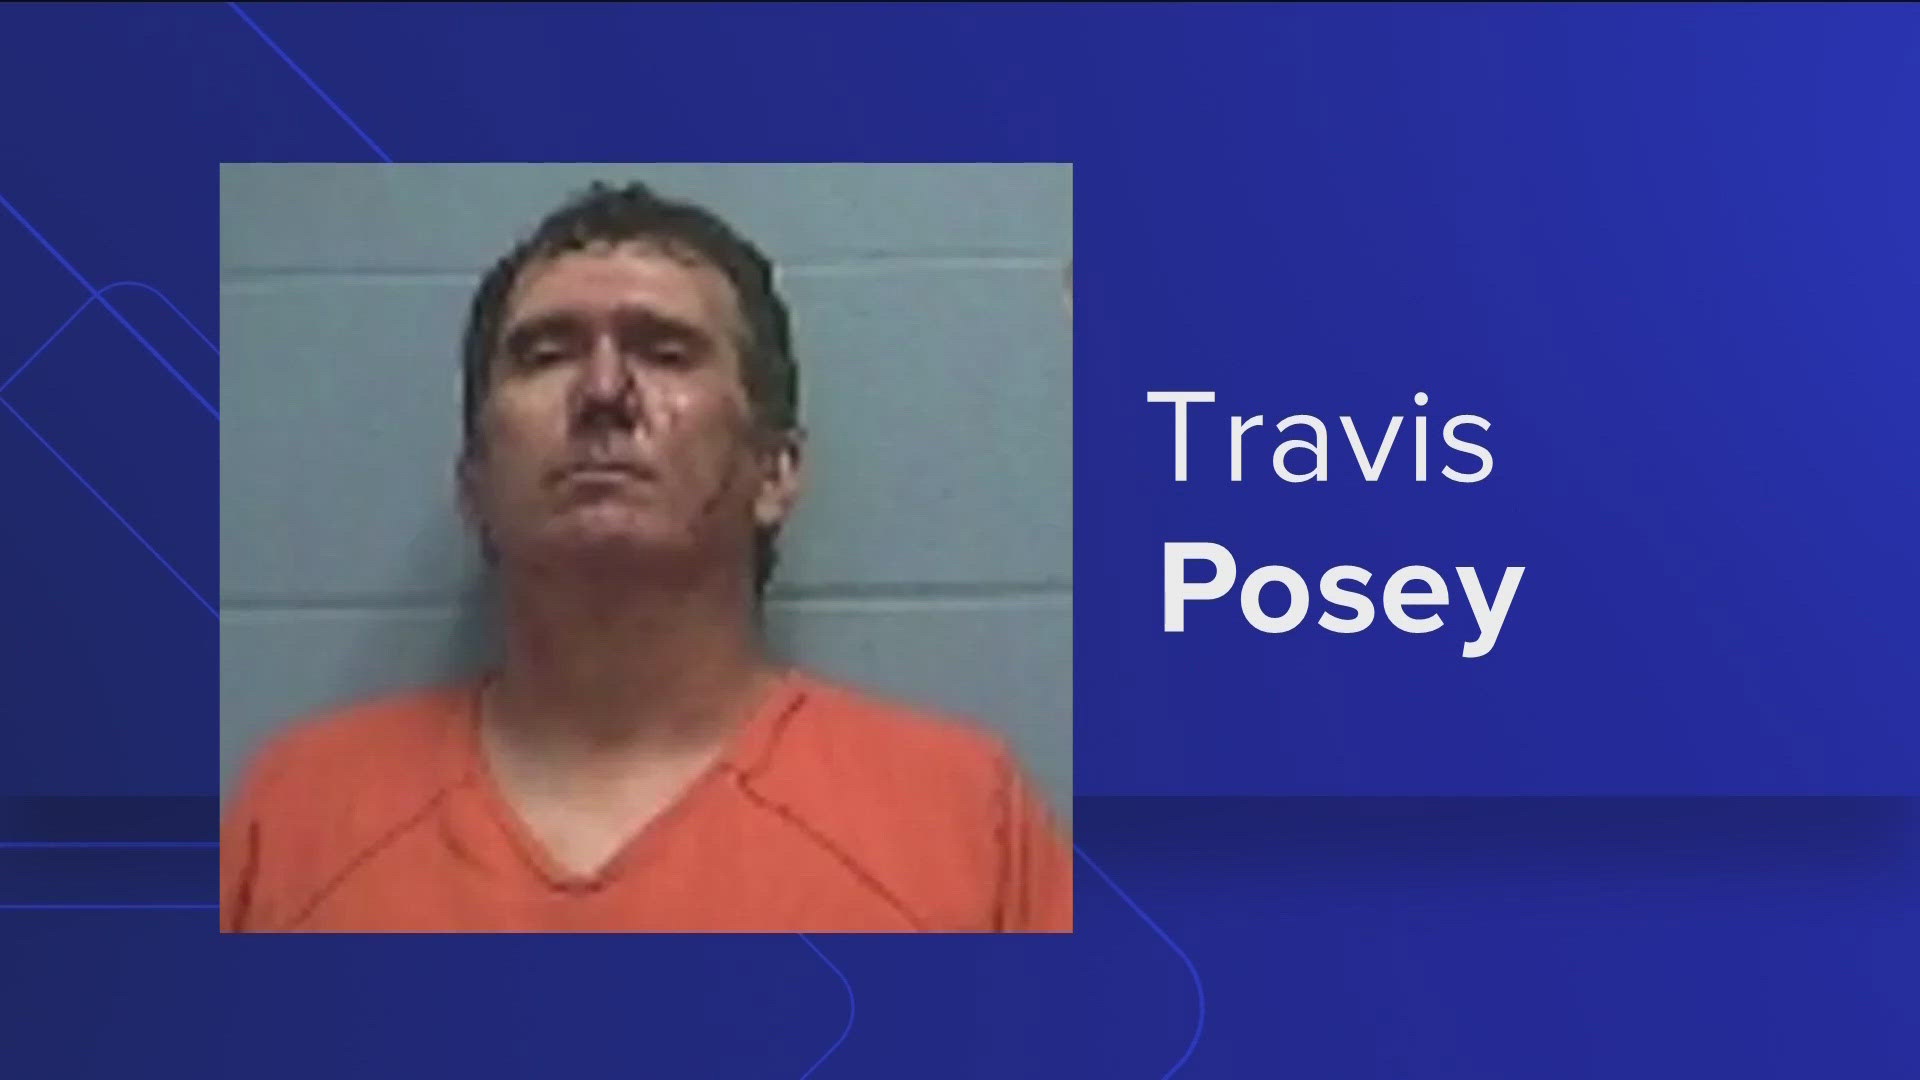 Travis Posey, 44, faces four counts of capital murder and 10 counts of attempted capital murder for a shooting in Fordyce, Arkansas.